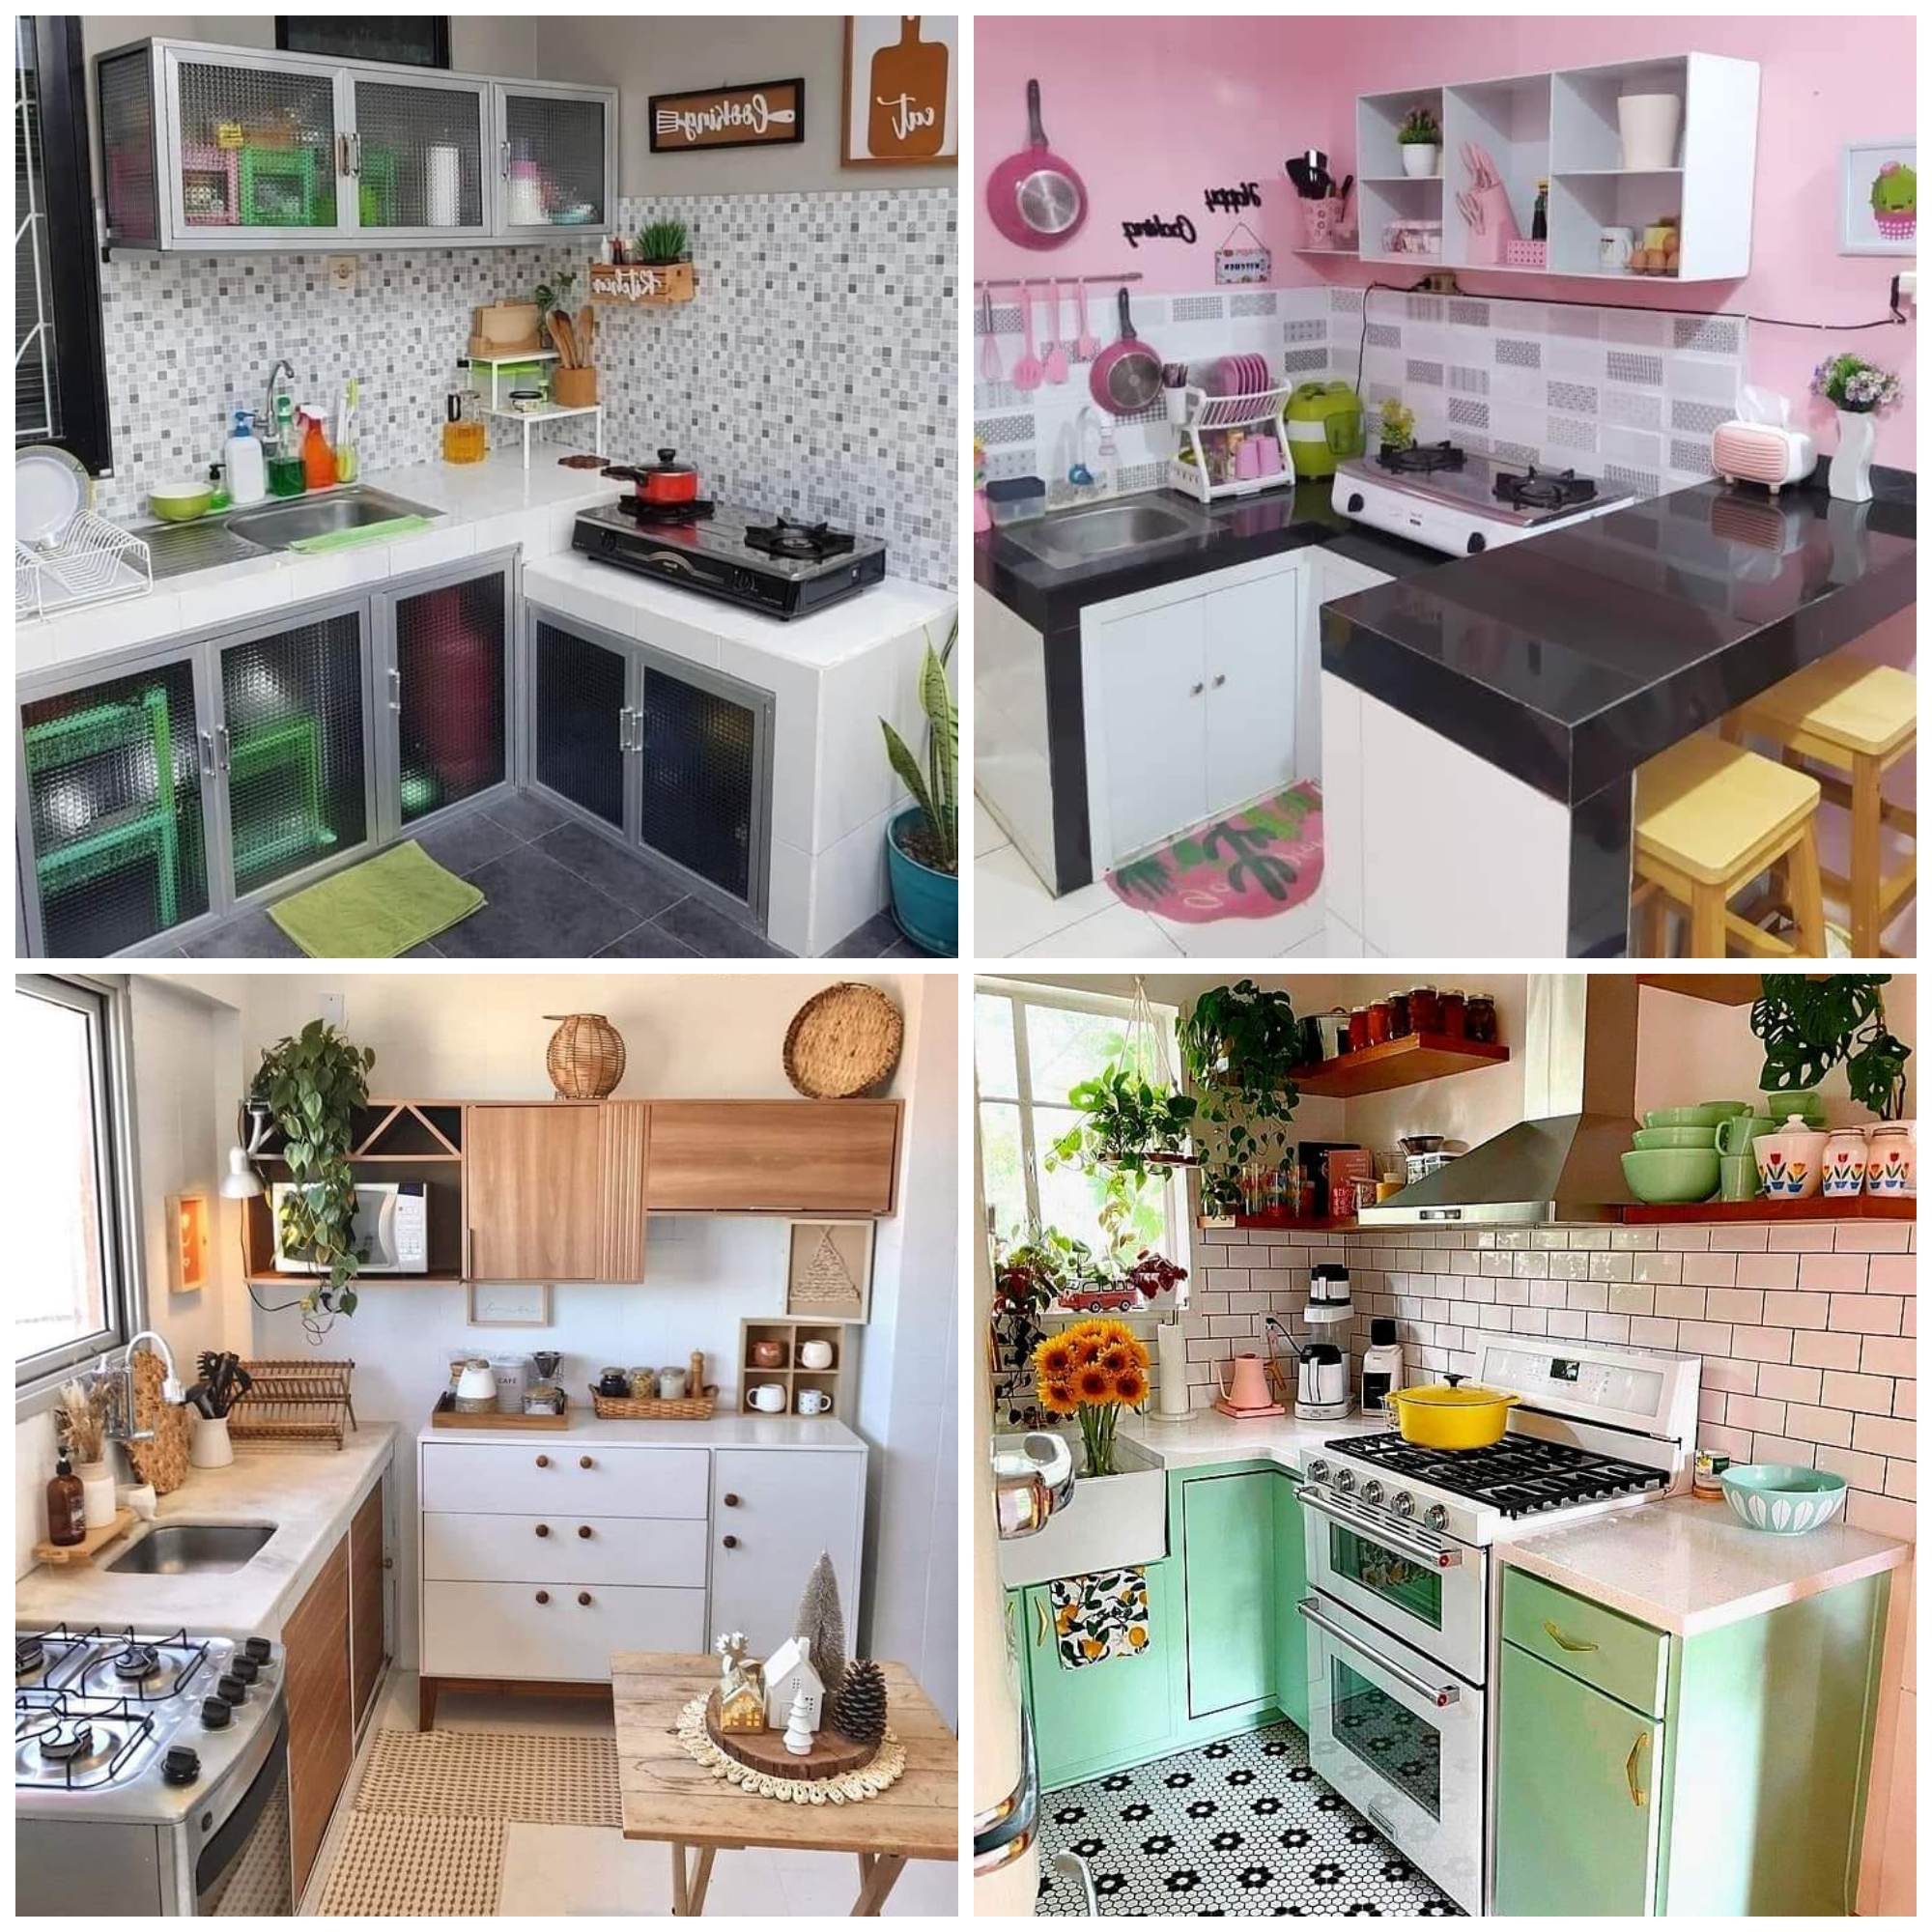 Small Kitchen Design Ideas | Layout, Storage and More